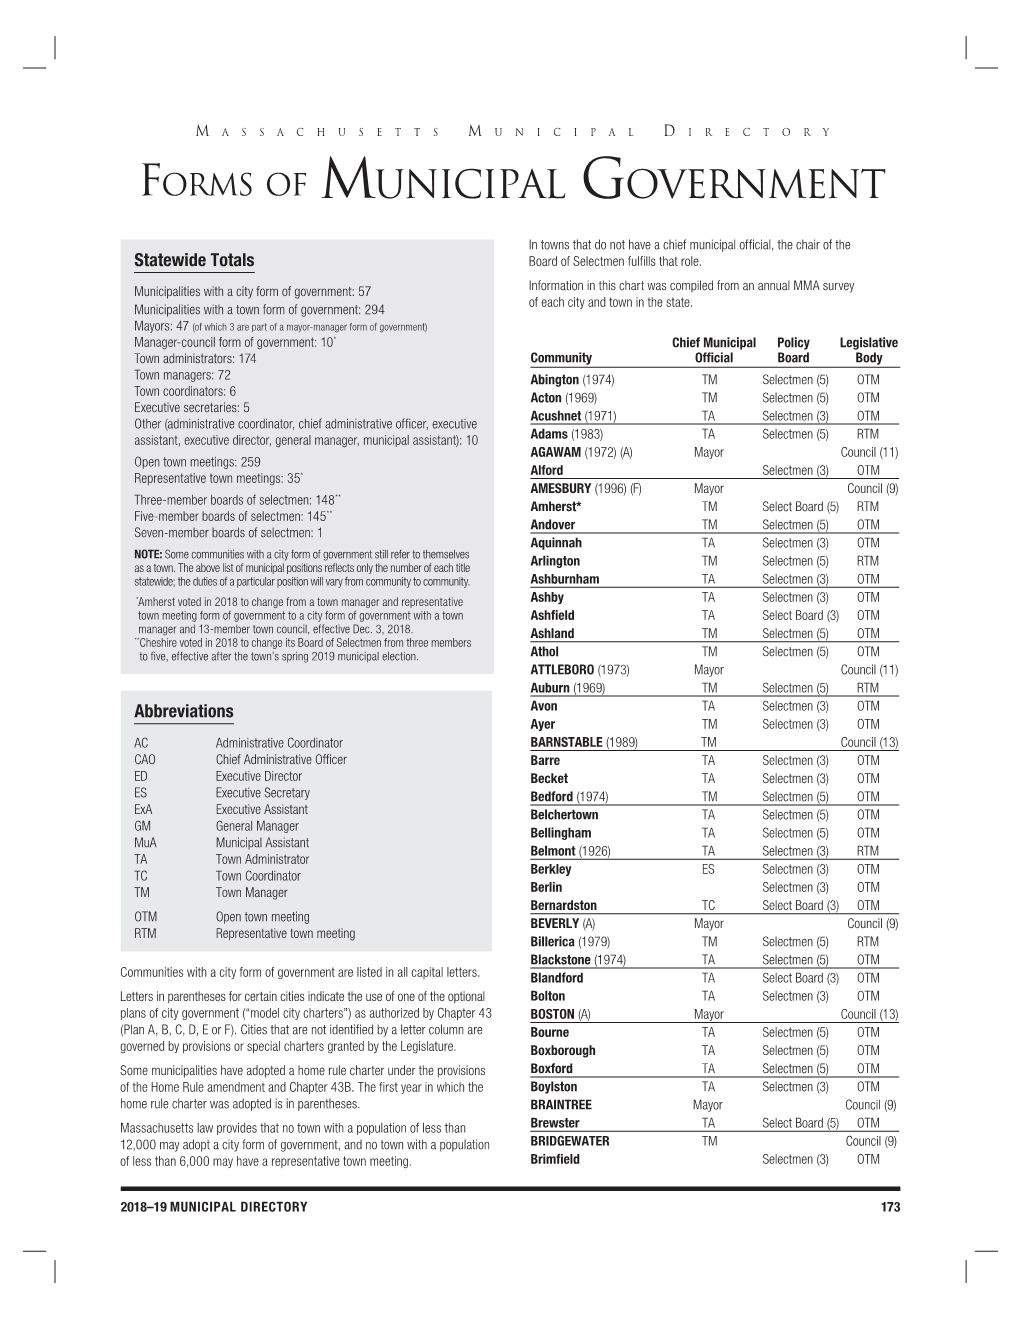 Forms of Municipal Government